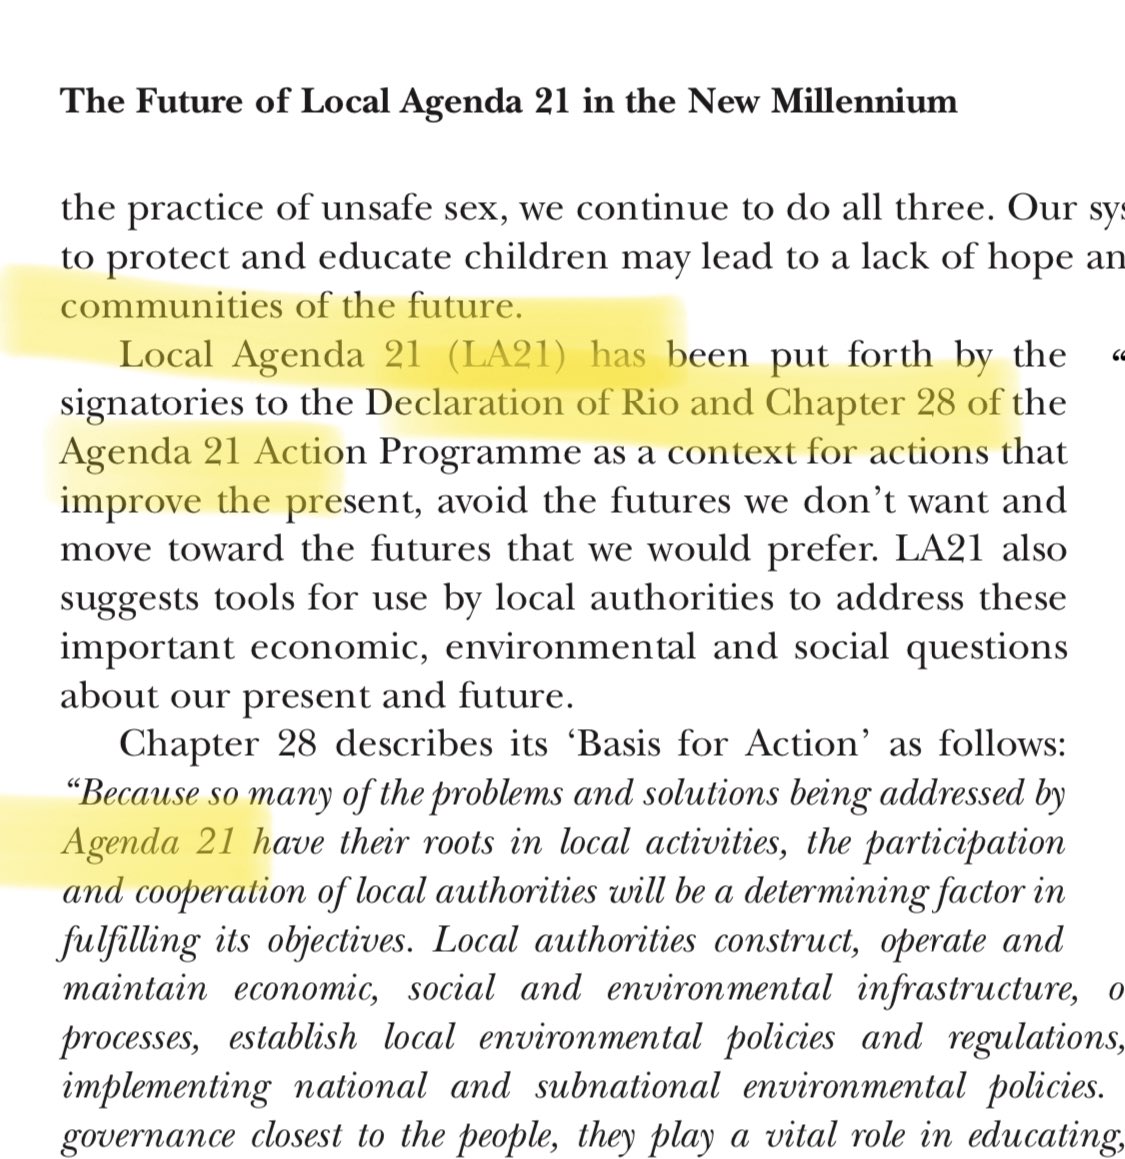 The document clearly states that Local Agenda 21 is a part of UN Agenda 21 and the Rio Declaration (1992)